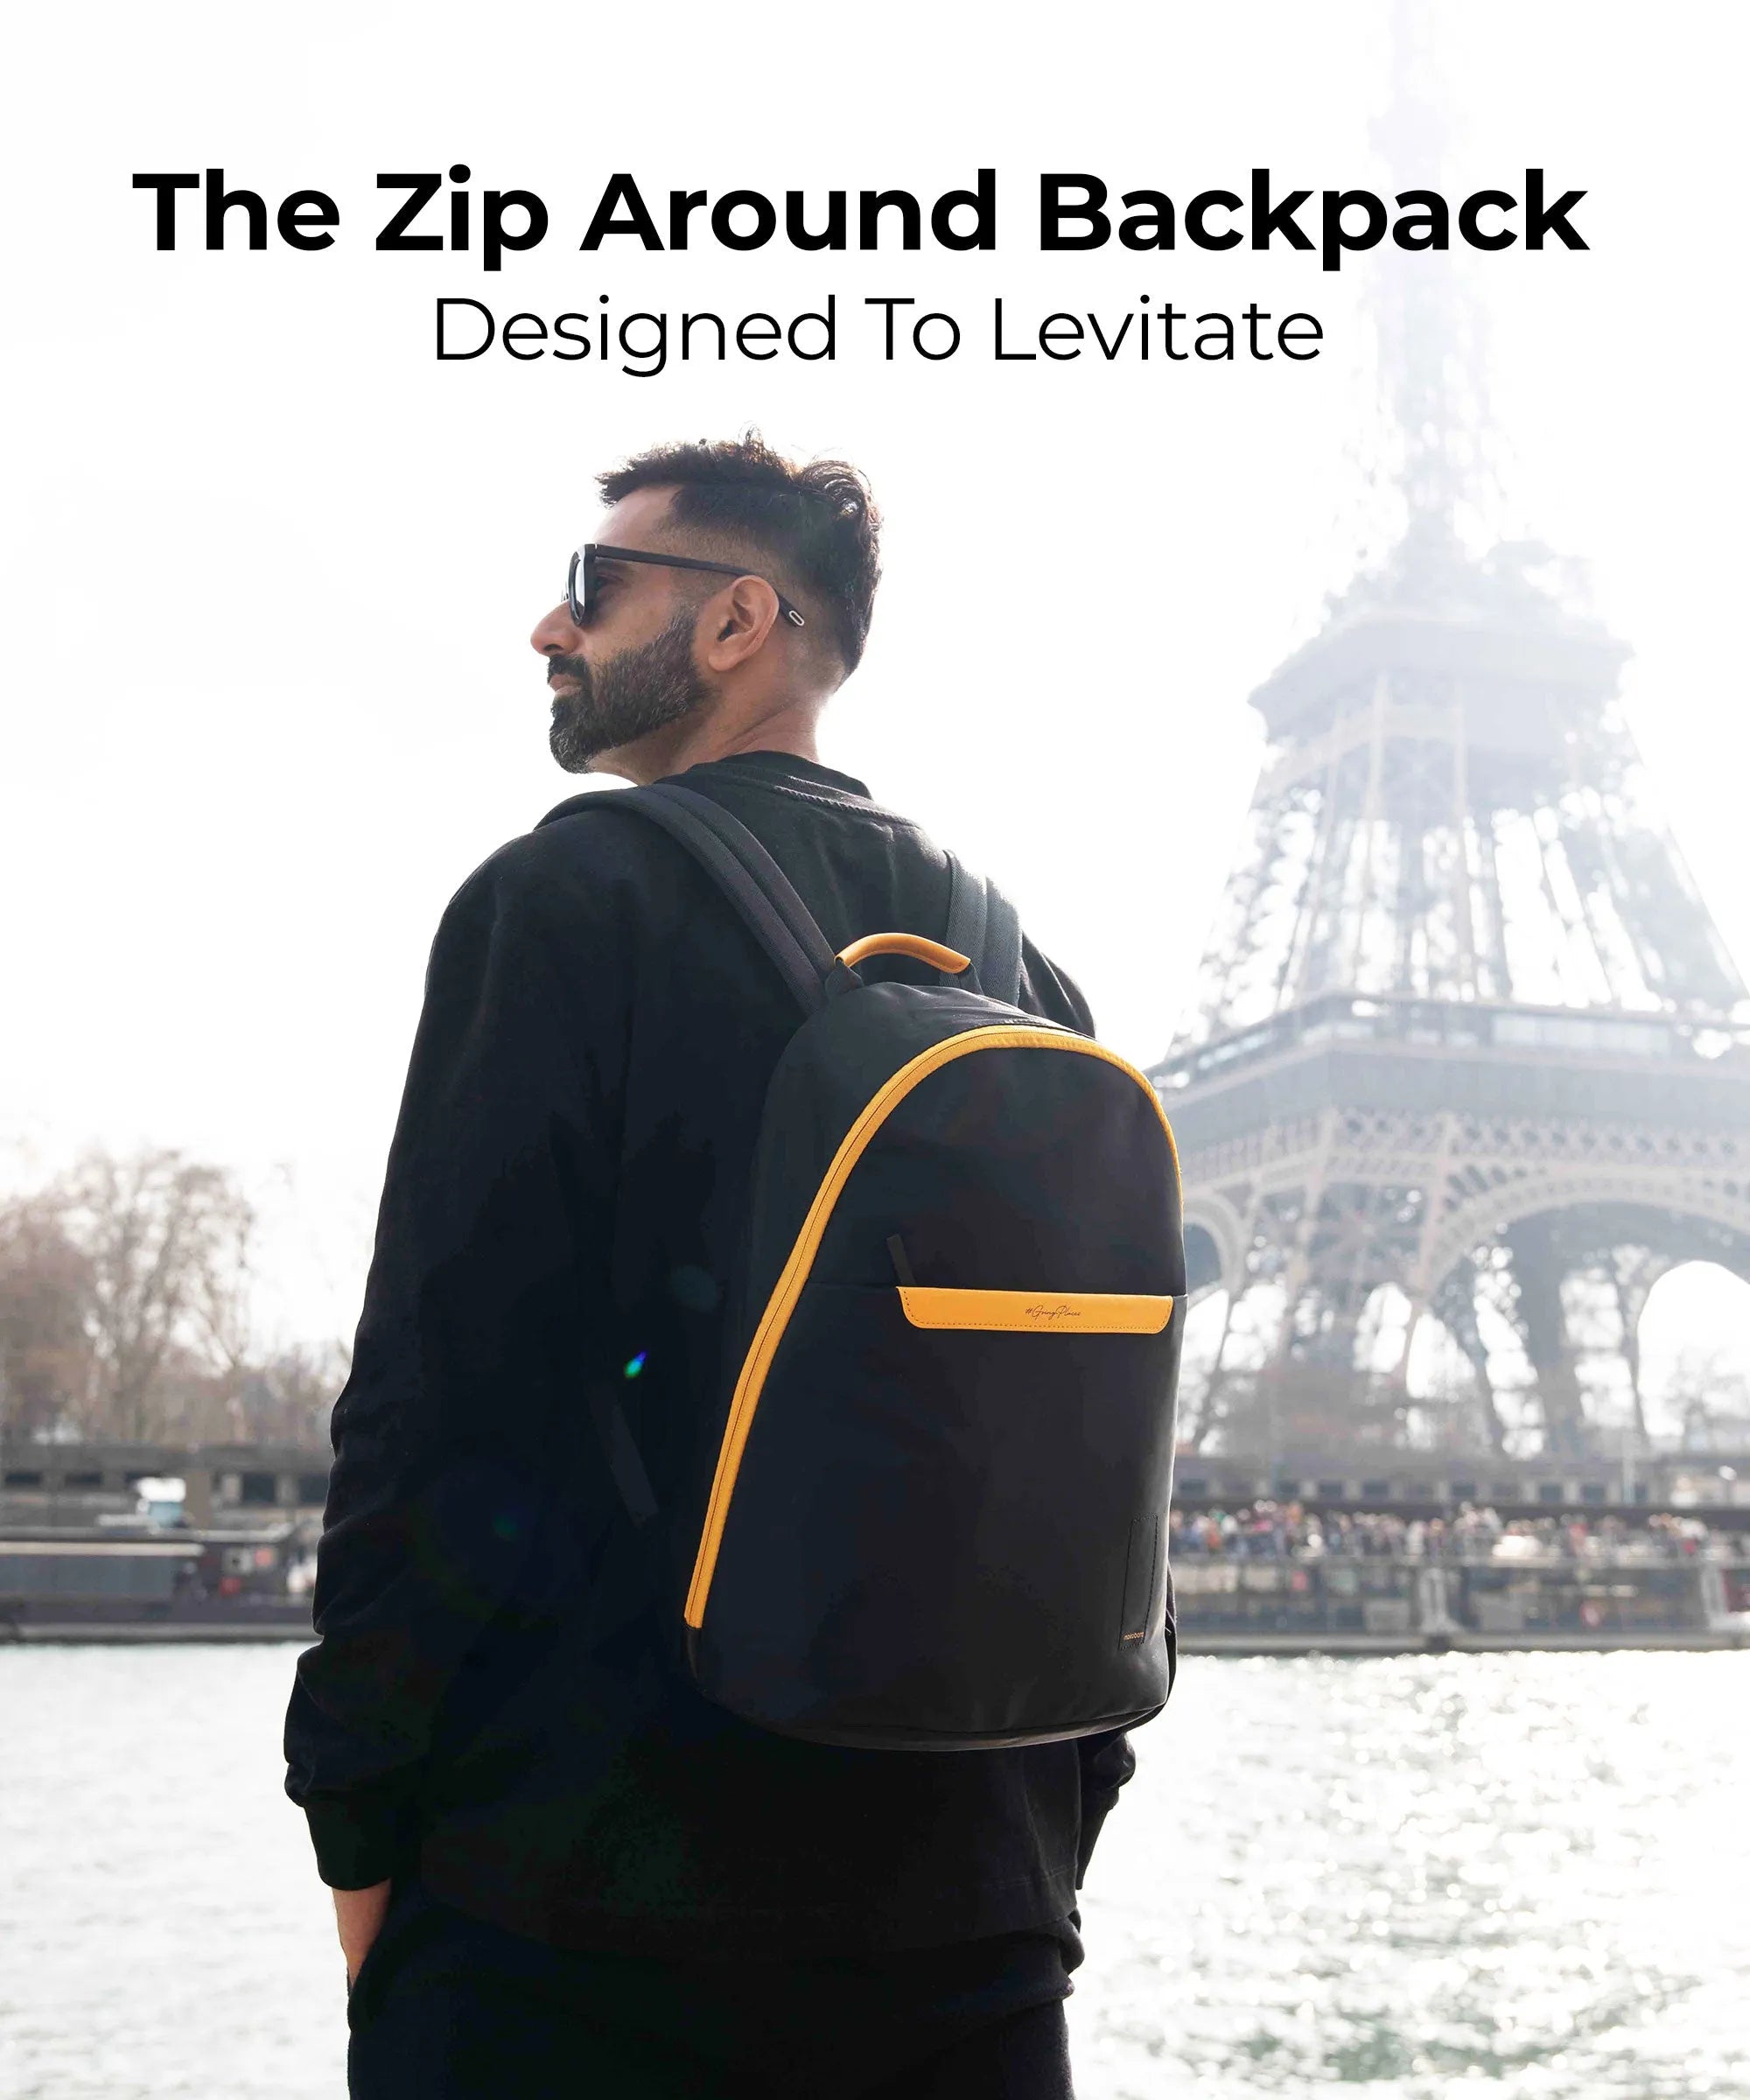 Color_Crypto Sunray (Limited Edition) | The Zip Around Backpack